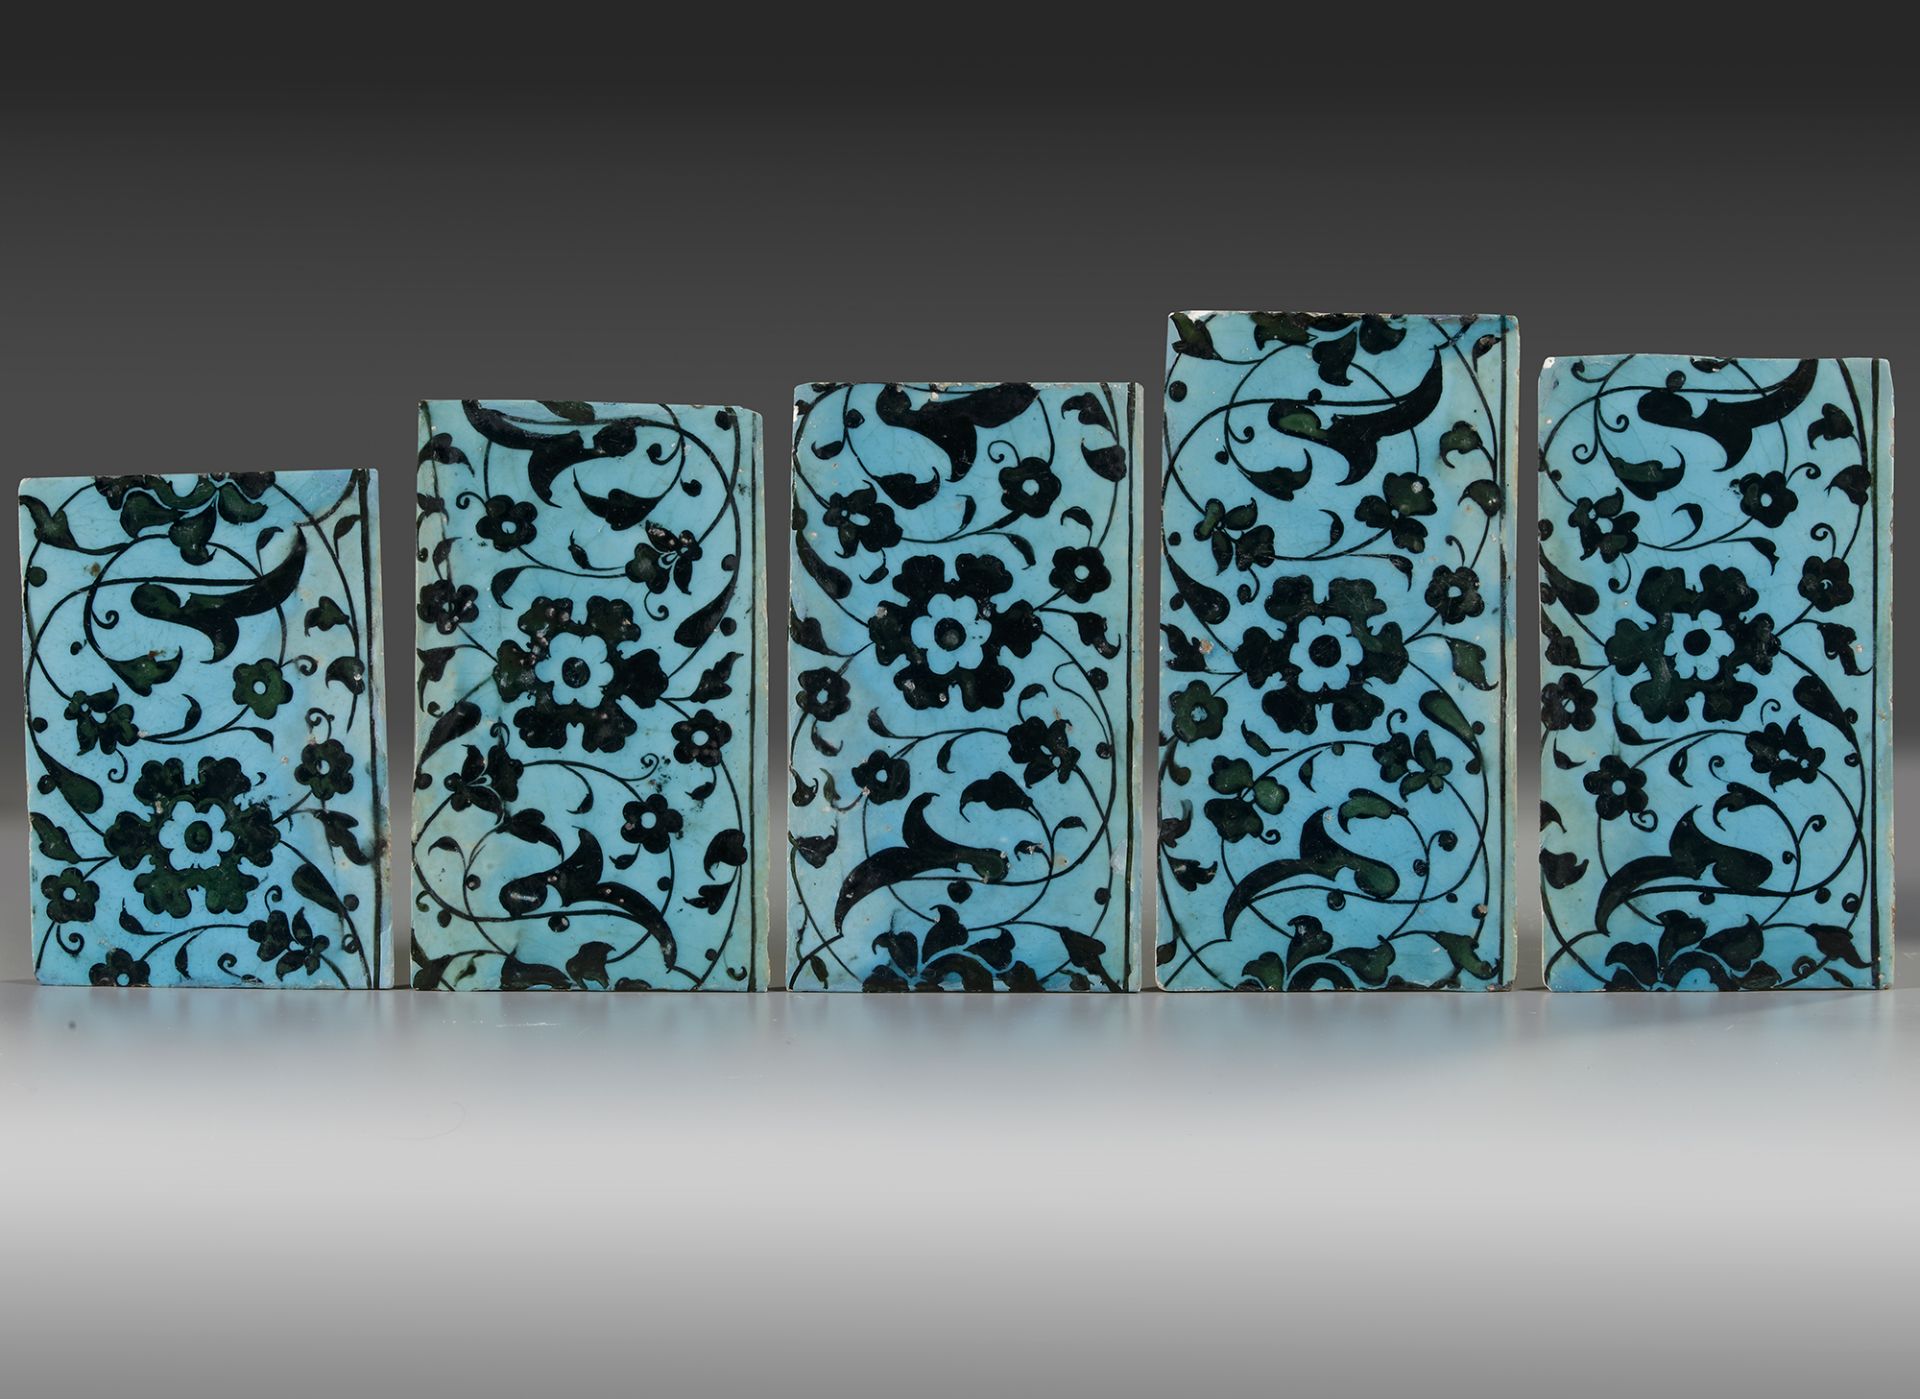 FIVE BLACK AND TURQUOISE 'DOME OF THE ROCK' POTTERY TILES, JERUSALEM, SECOND HALF 16TH CENTURY - Image 2 of 3